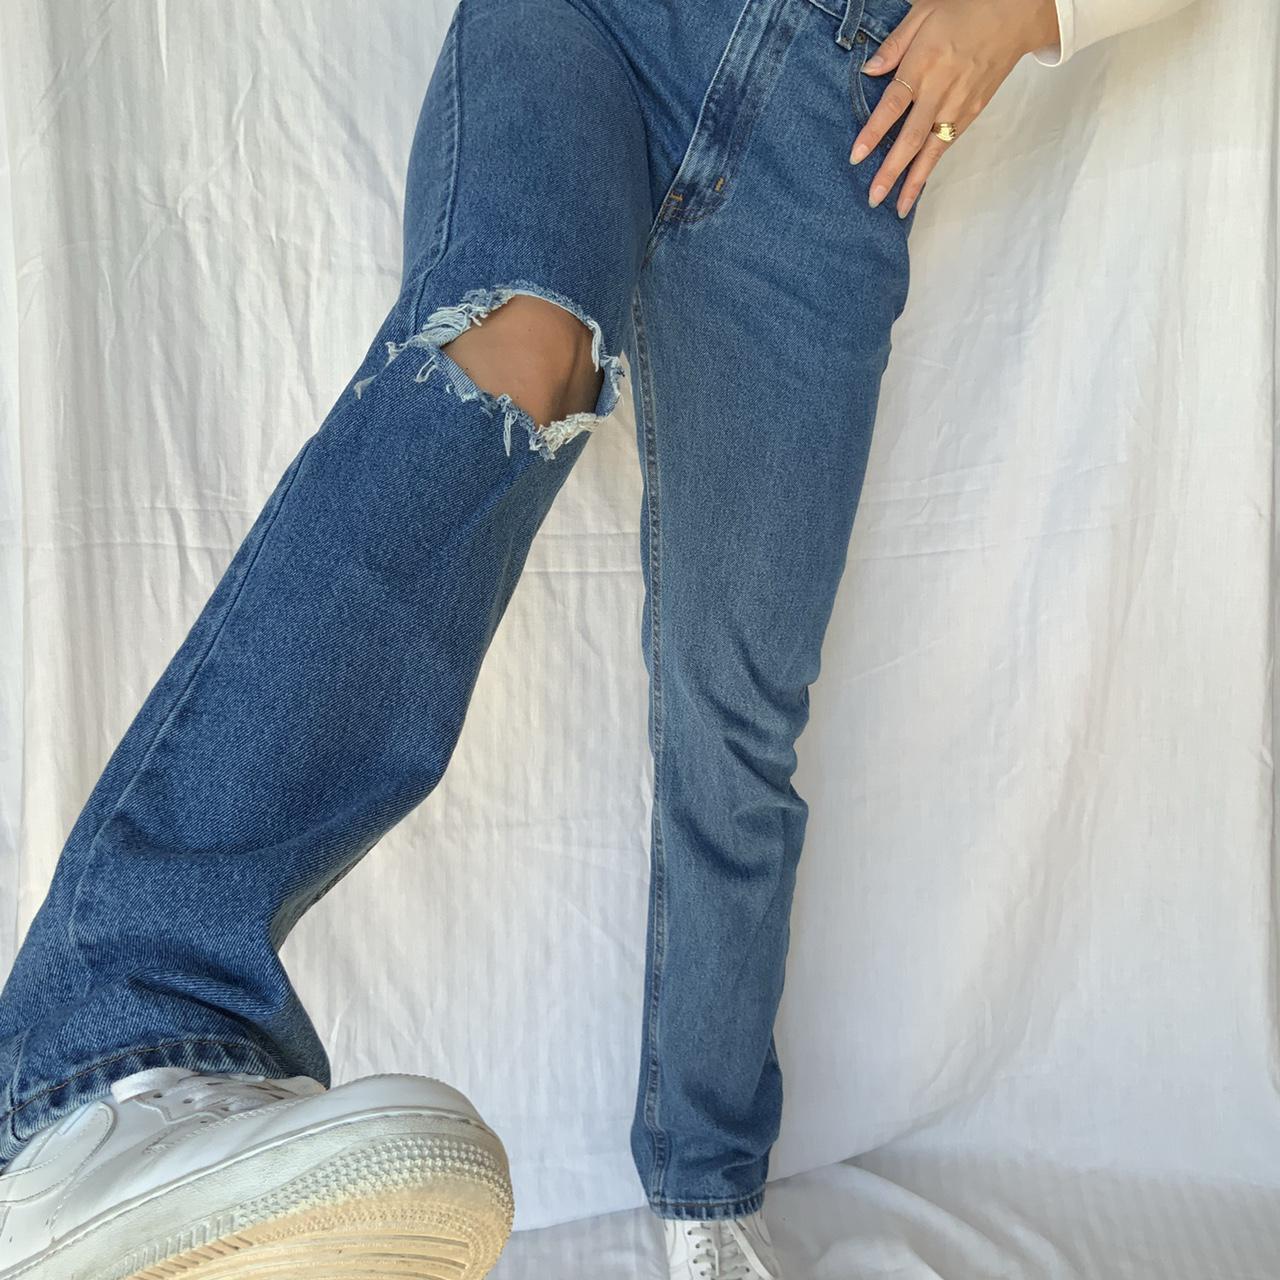 Women's Blue and Navy Jeans